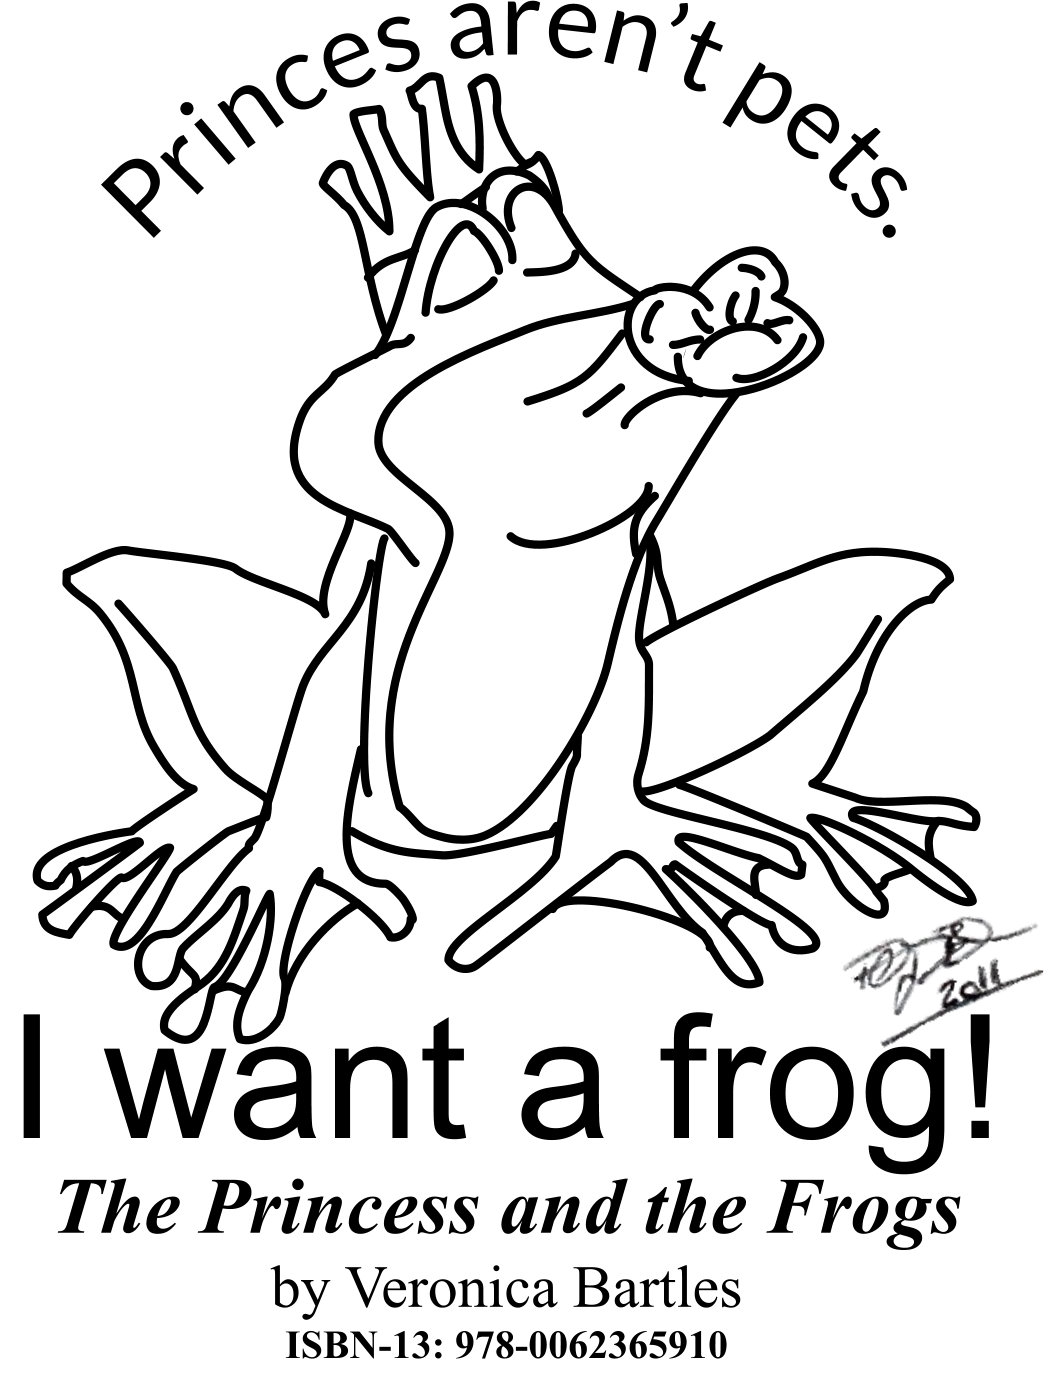 The Princess and the Frogs by Veronica Bartles - free frog coloring page